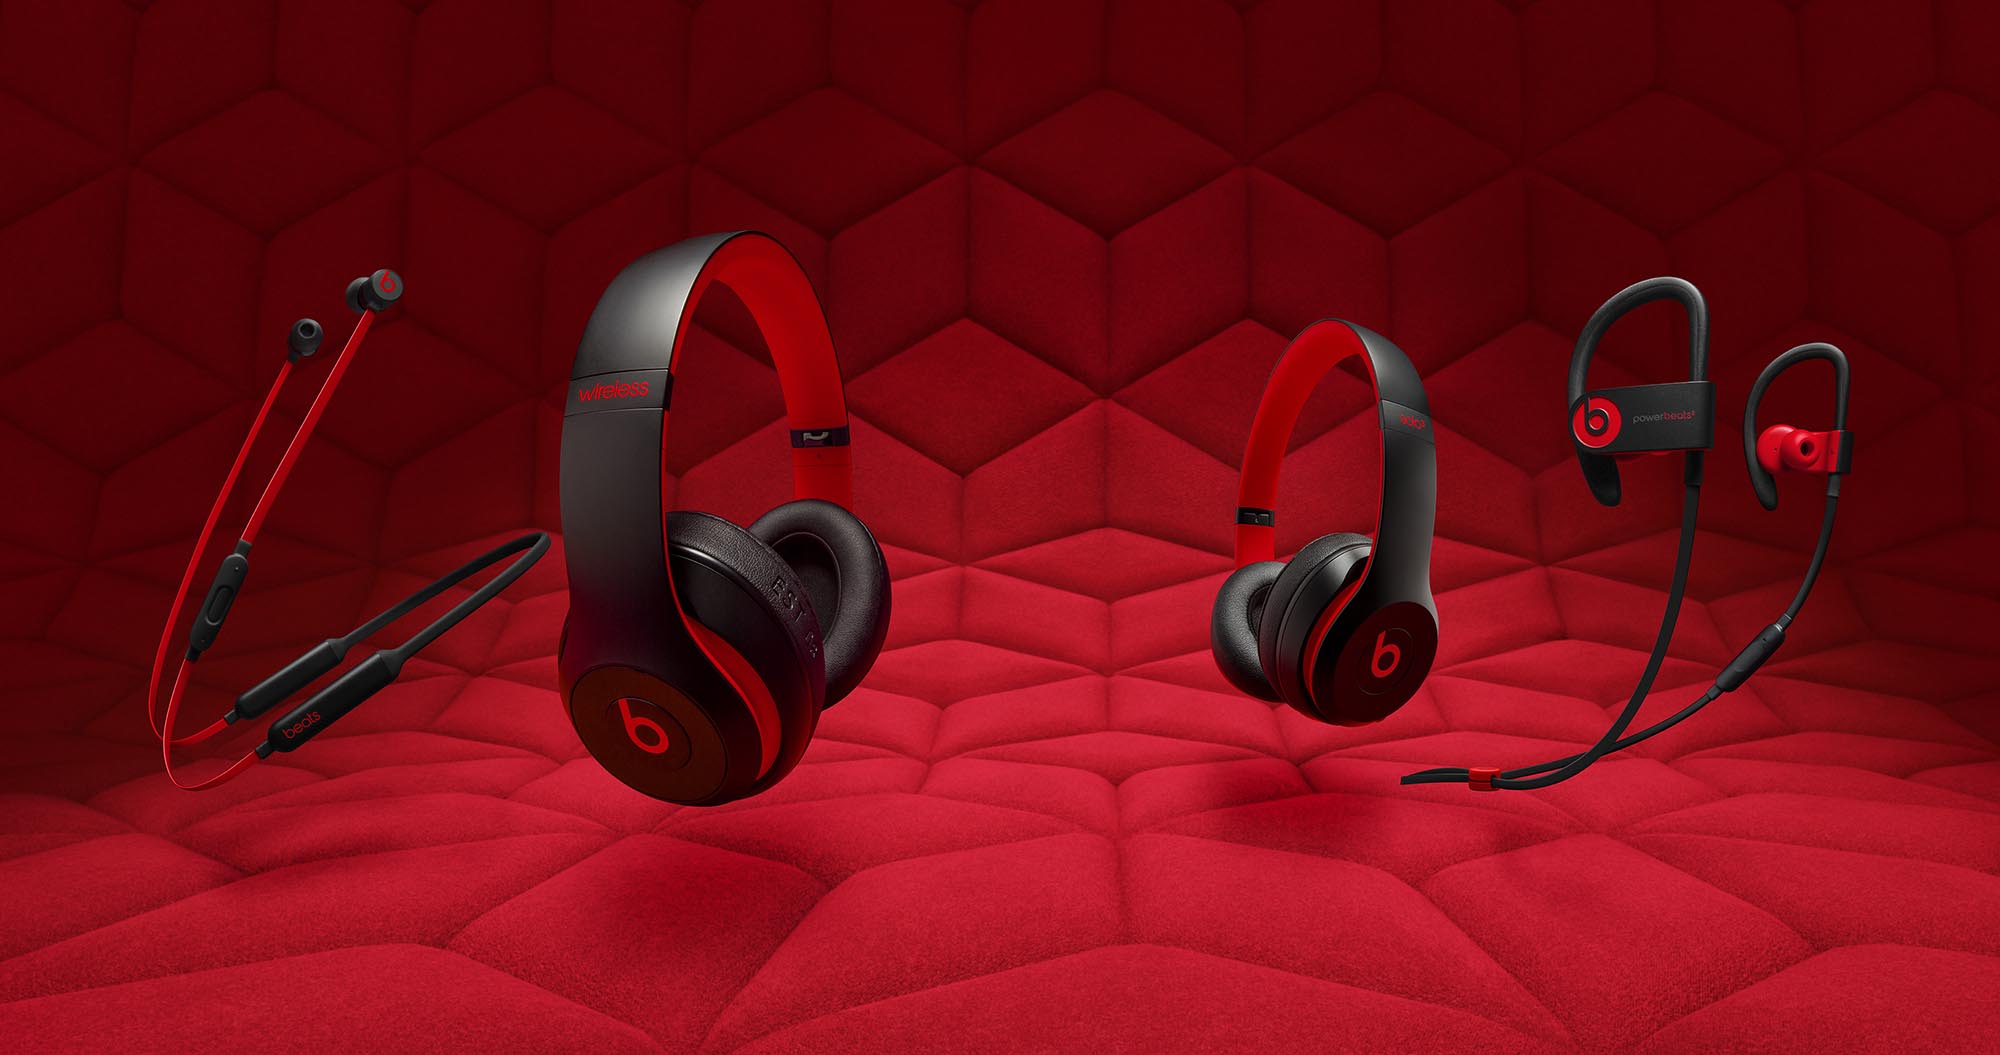 beats solo 3 wireless decade collection